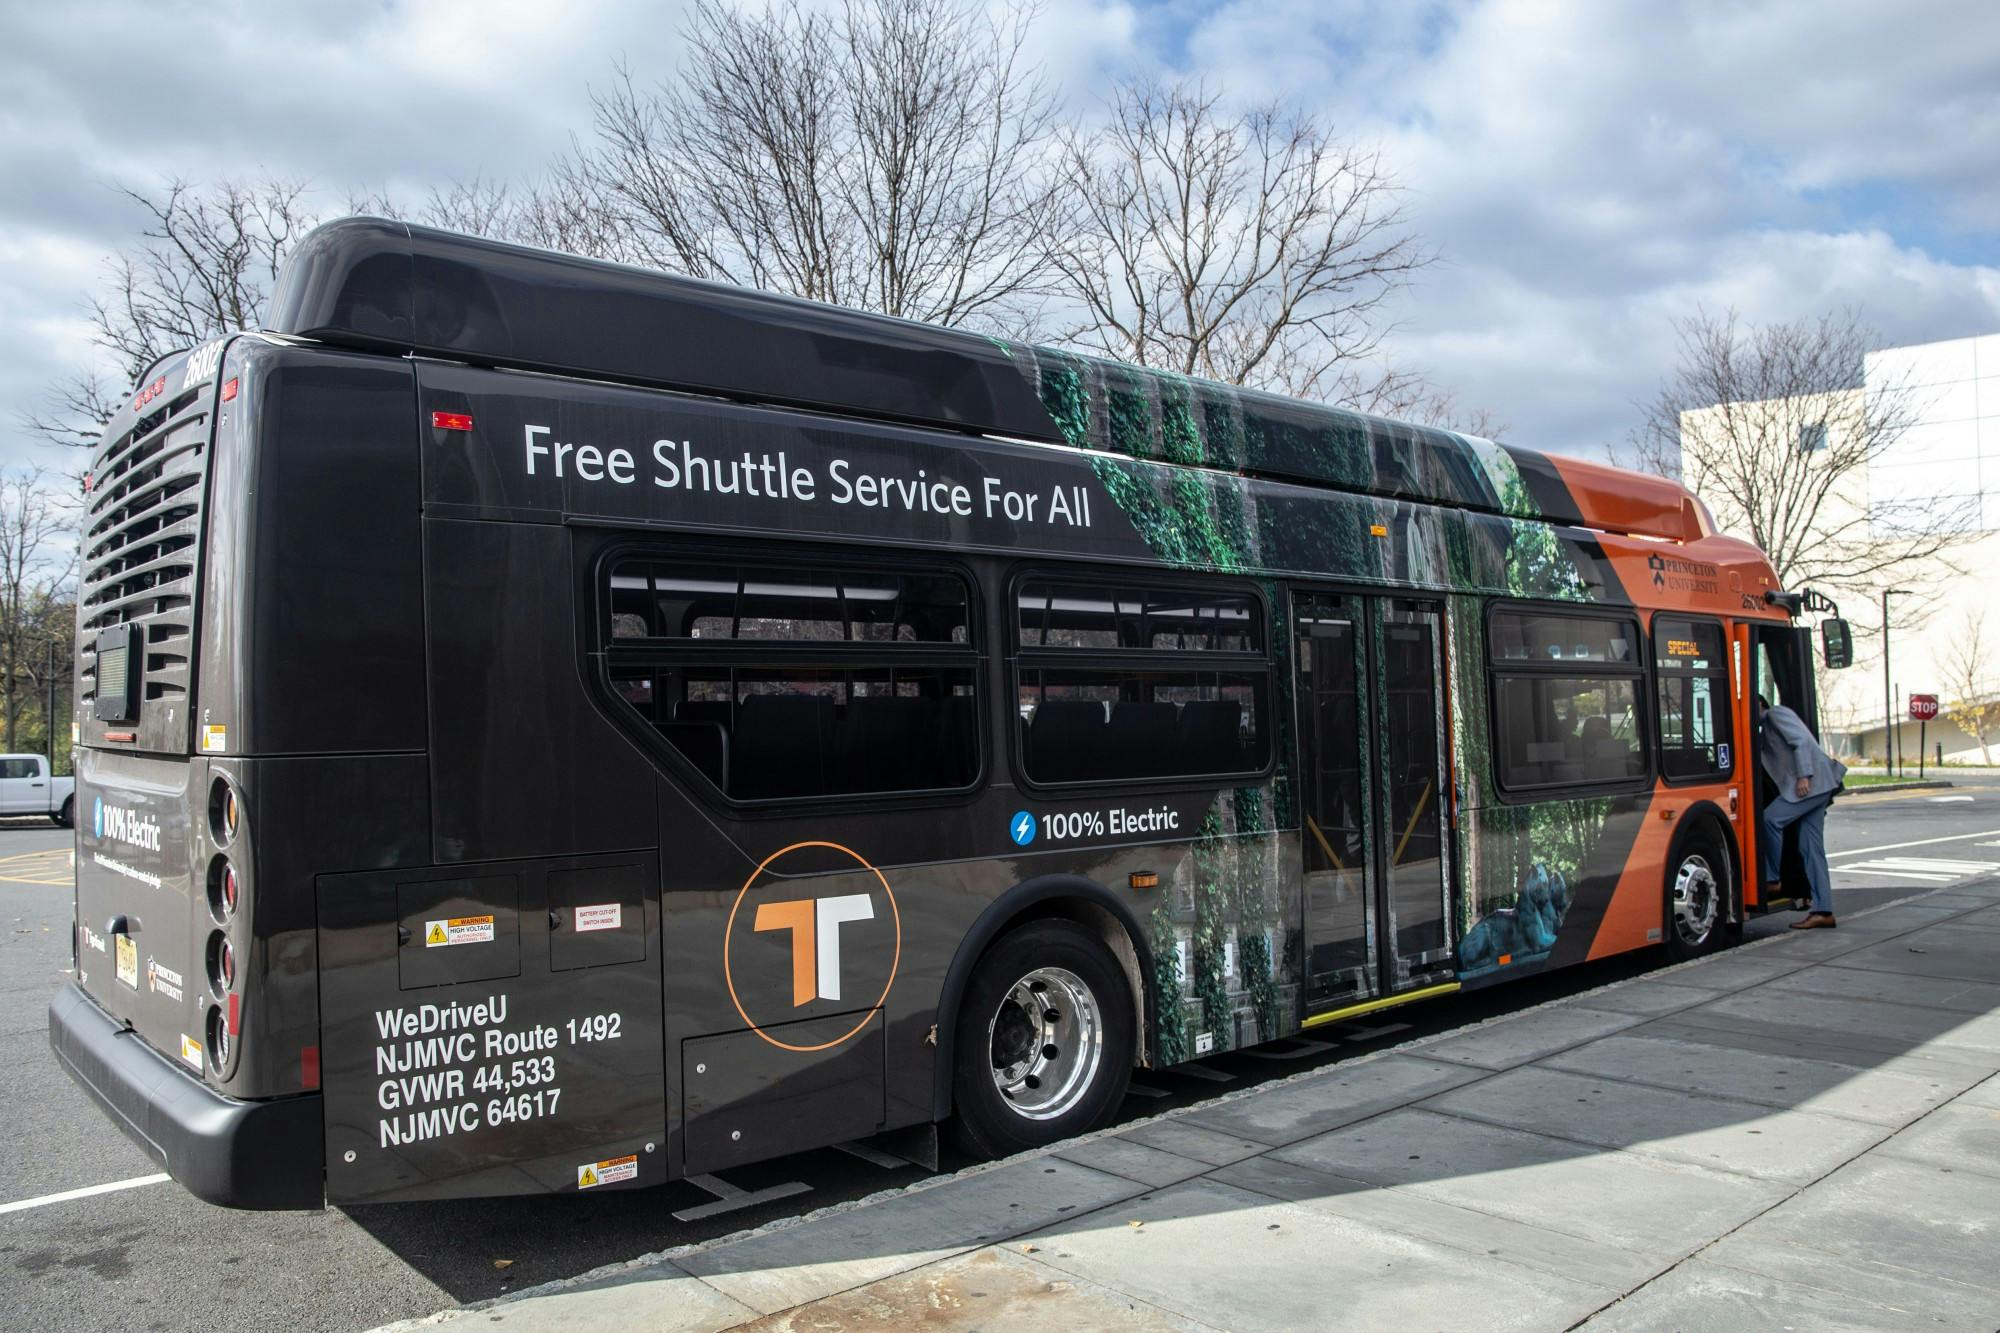 Princeton deploys first electric bus, plans to add more - The